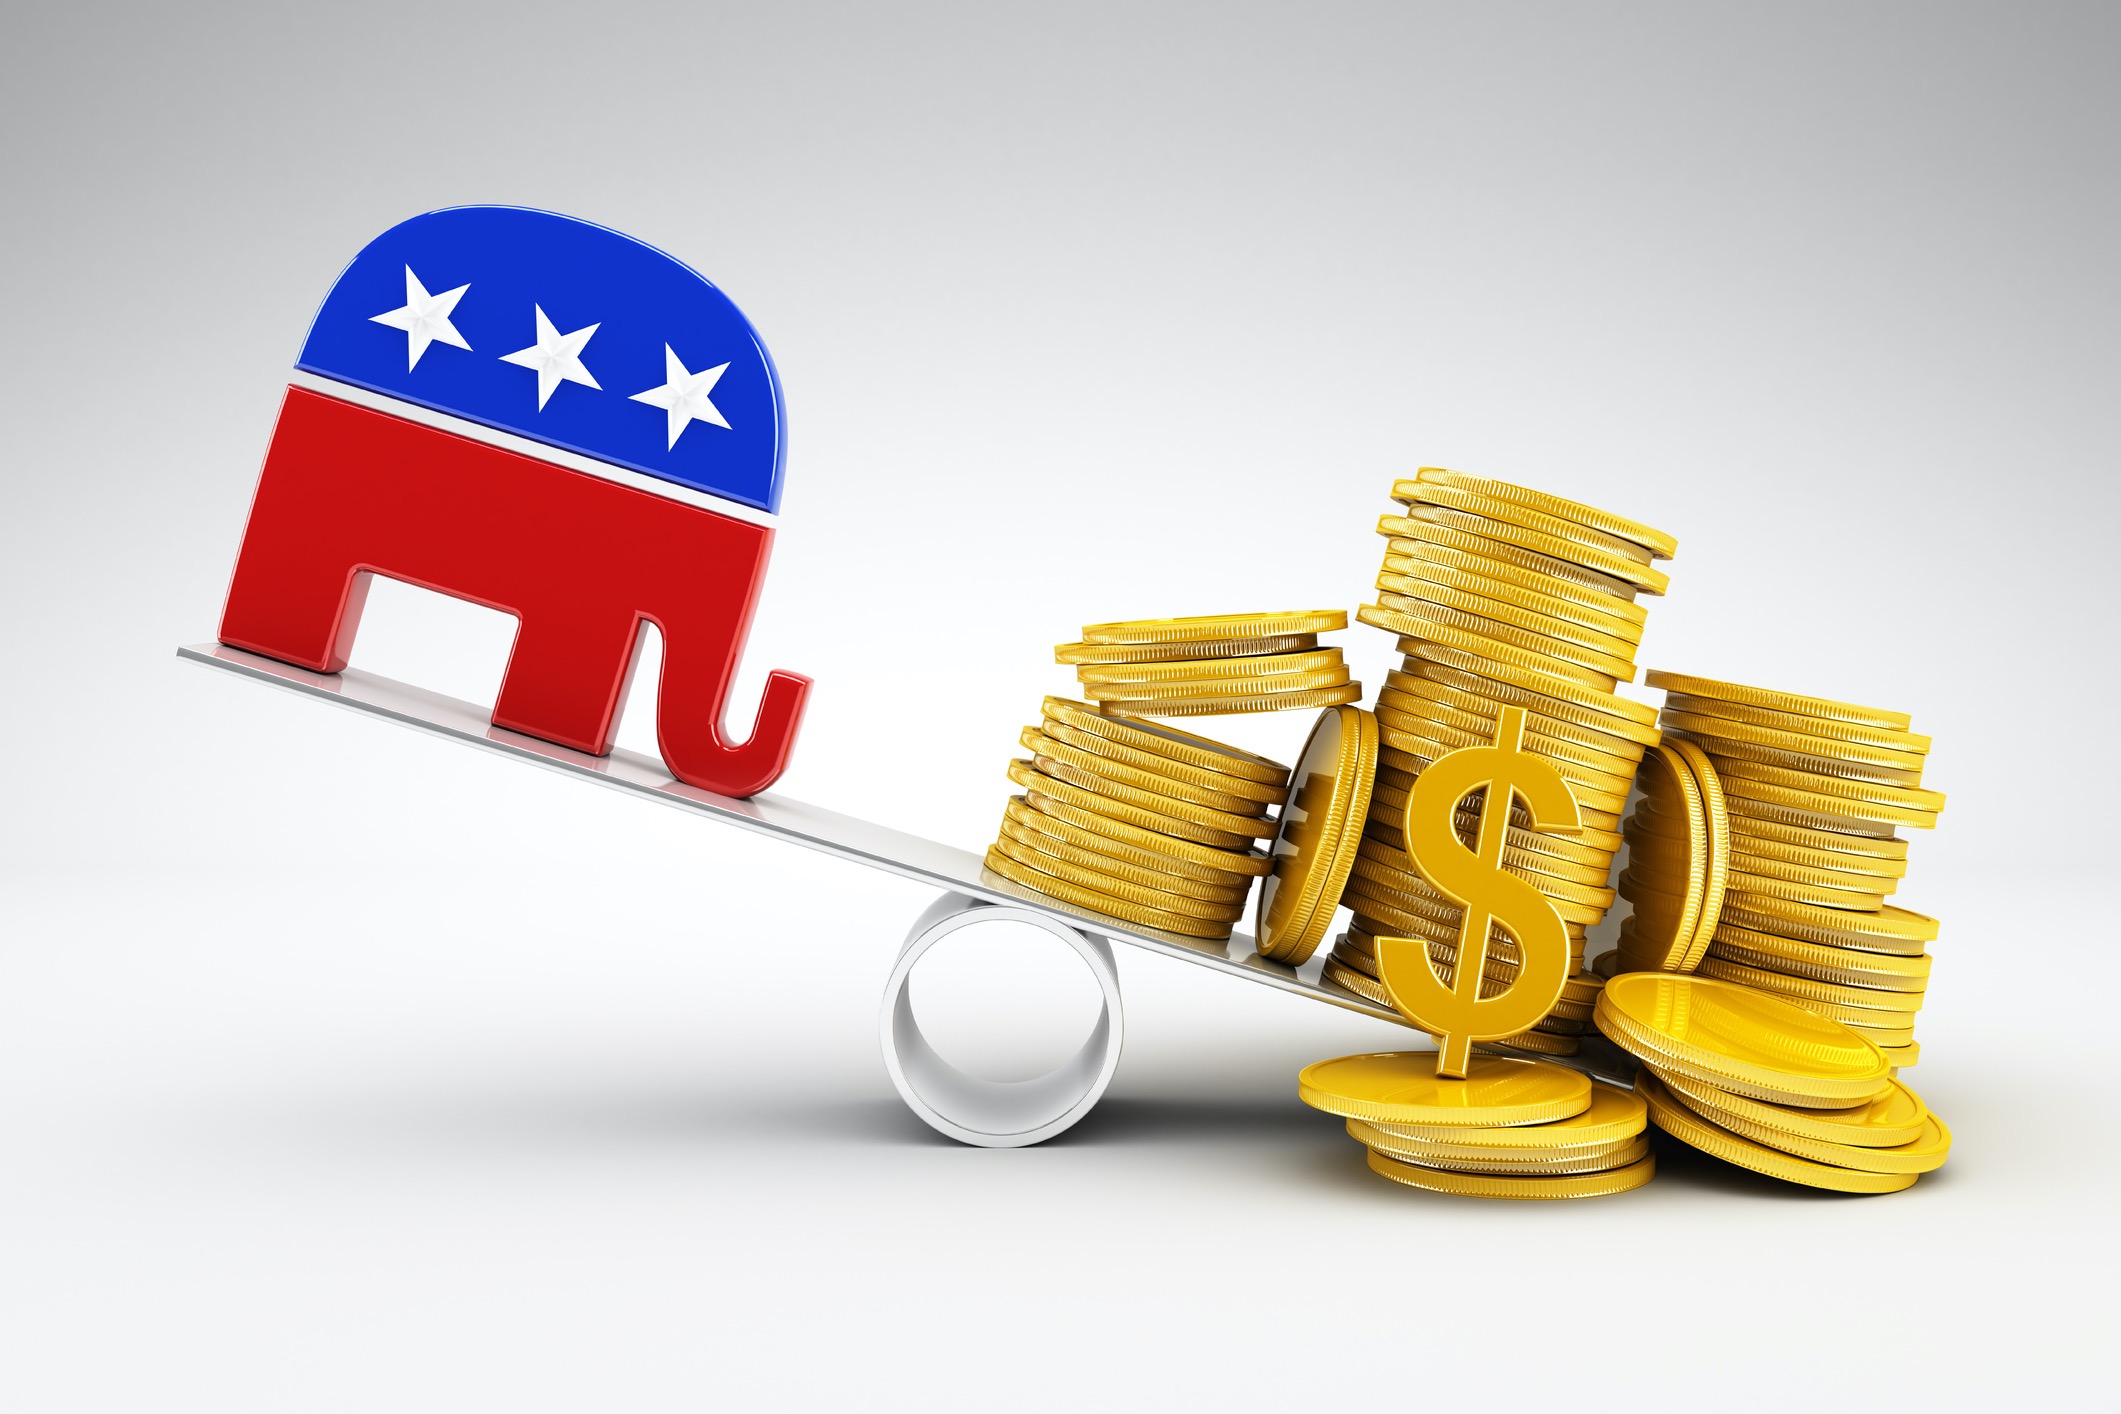 Illustration of the Republican Party's elephant logo on one side of a see-saw, with a pile of gold coins on the other side.